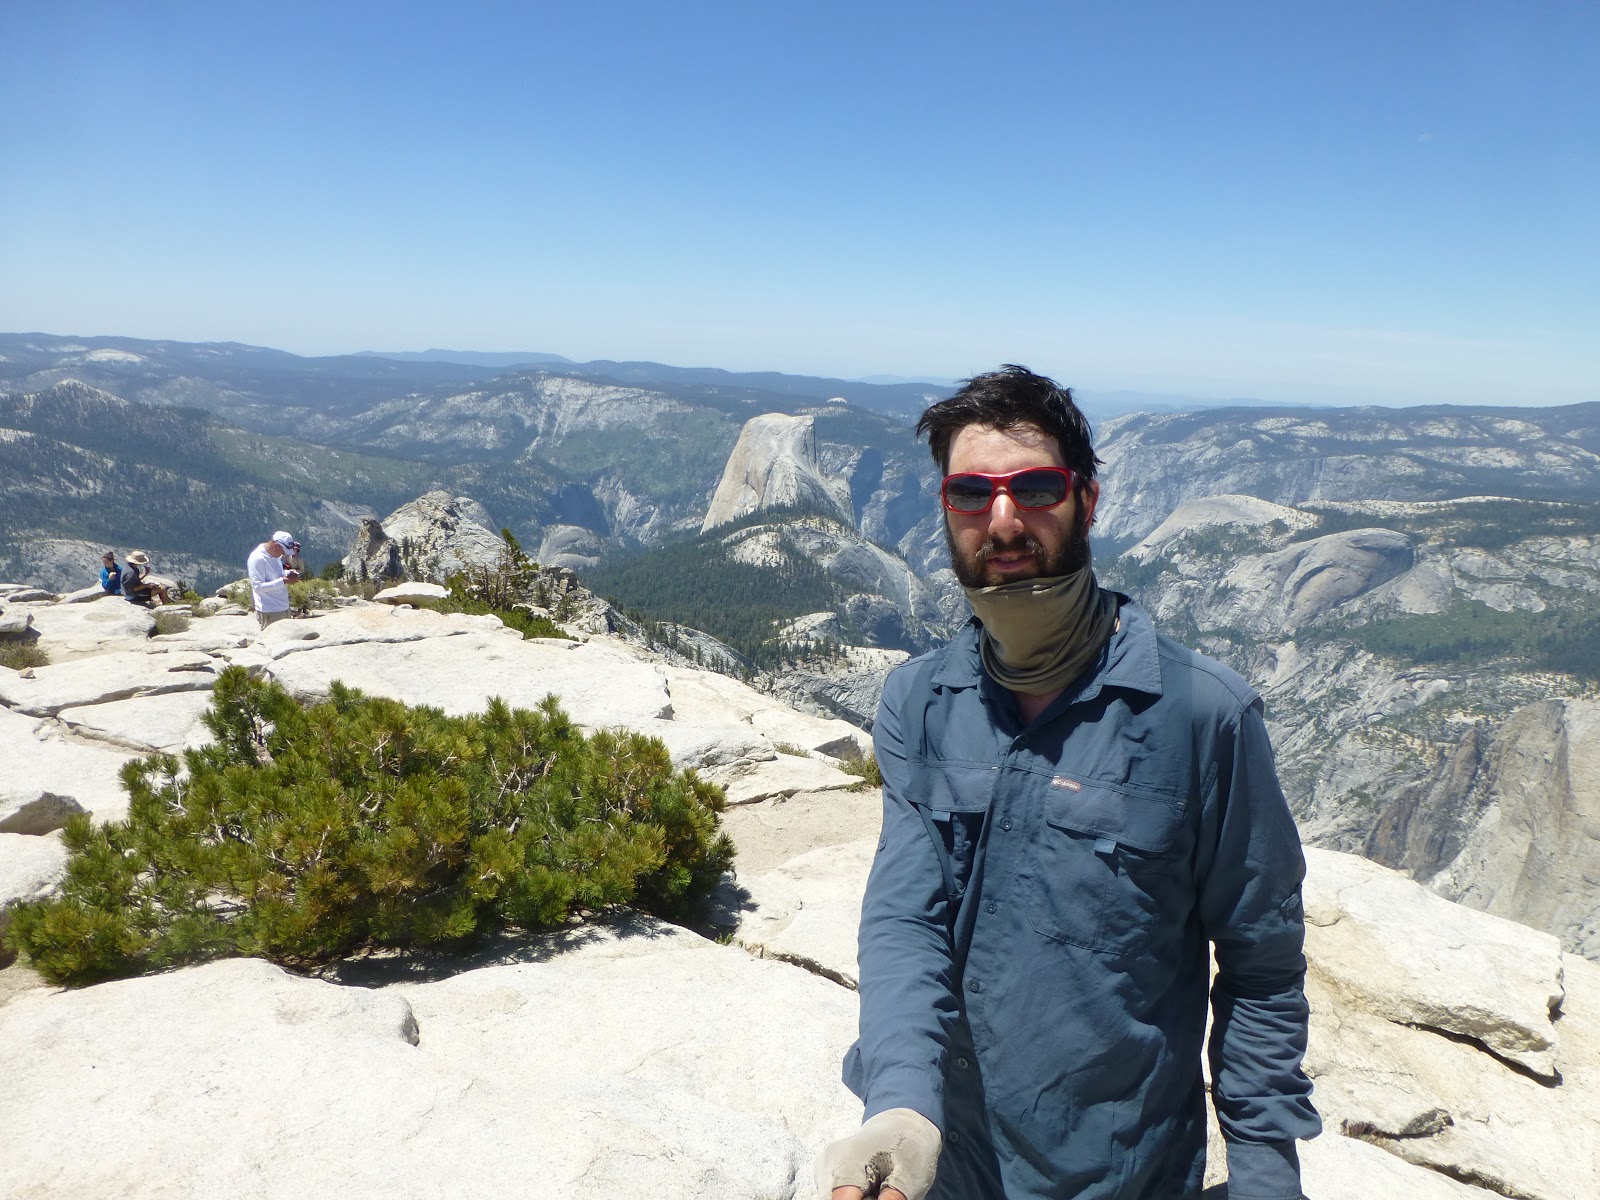 Posing on Clouds Rest, with Half Dome in the background